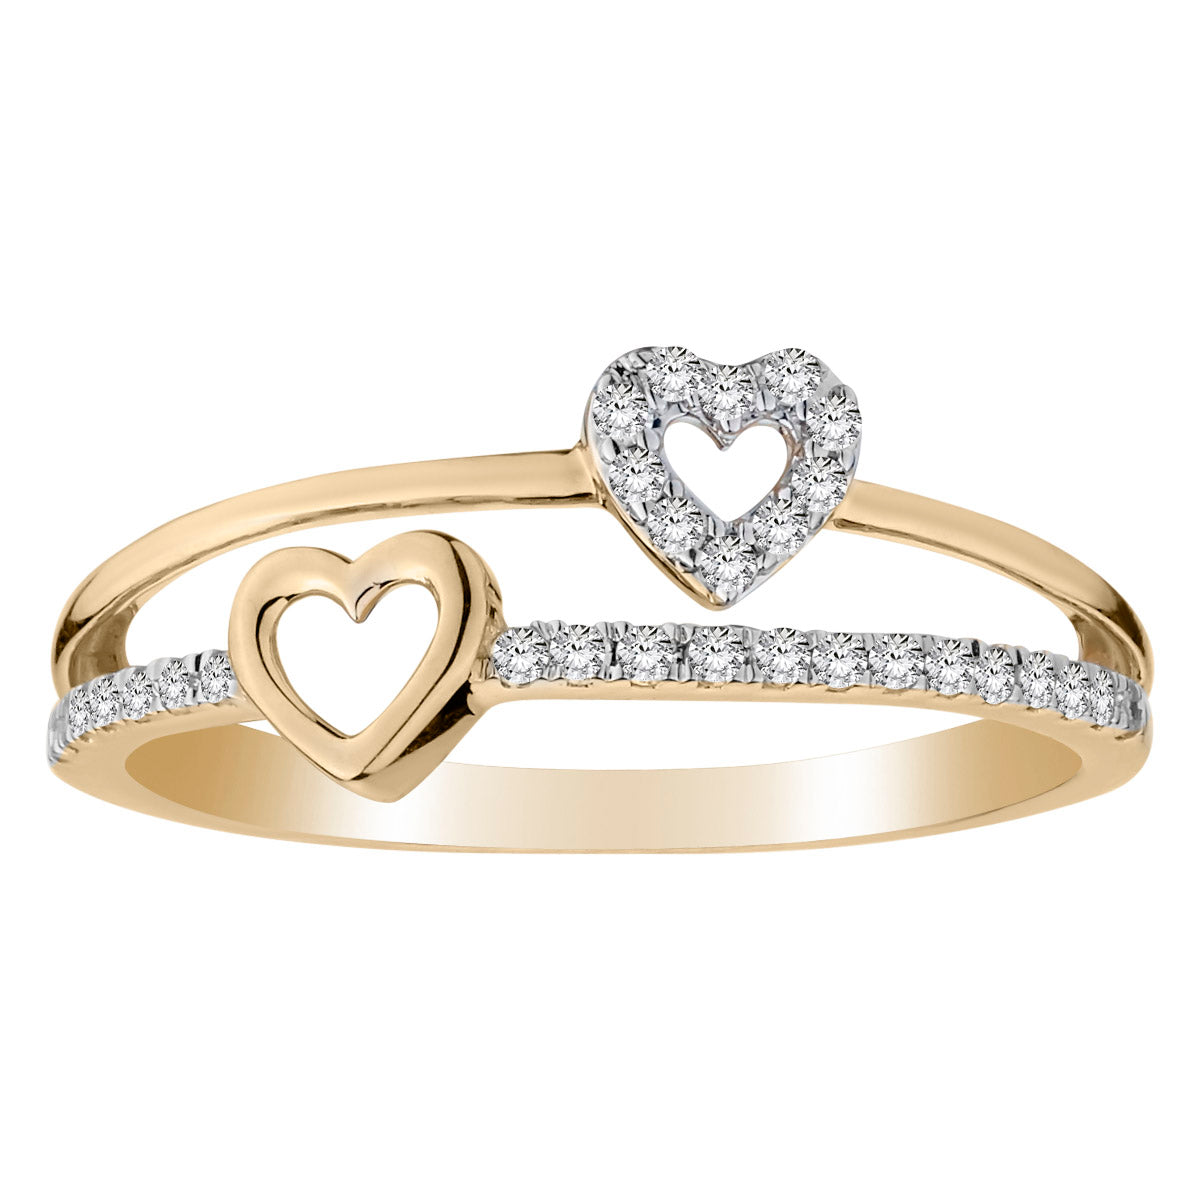 .15 Carat of Diamonds Hearts Ring, 10kt Yellow Gold......................NOW